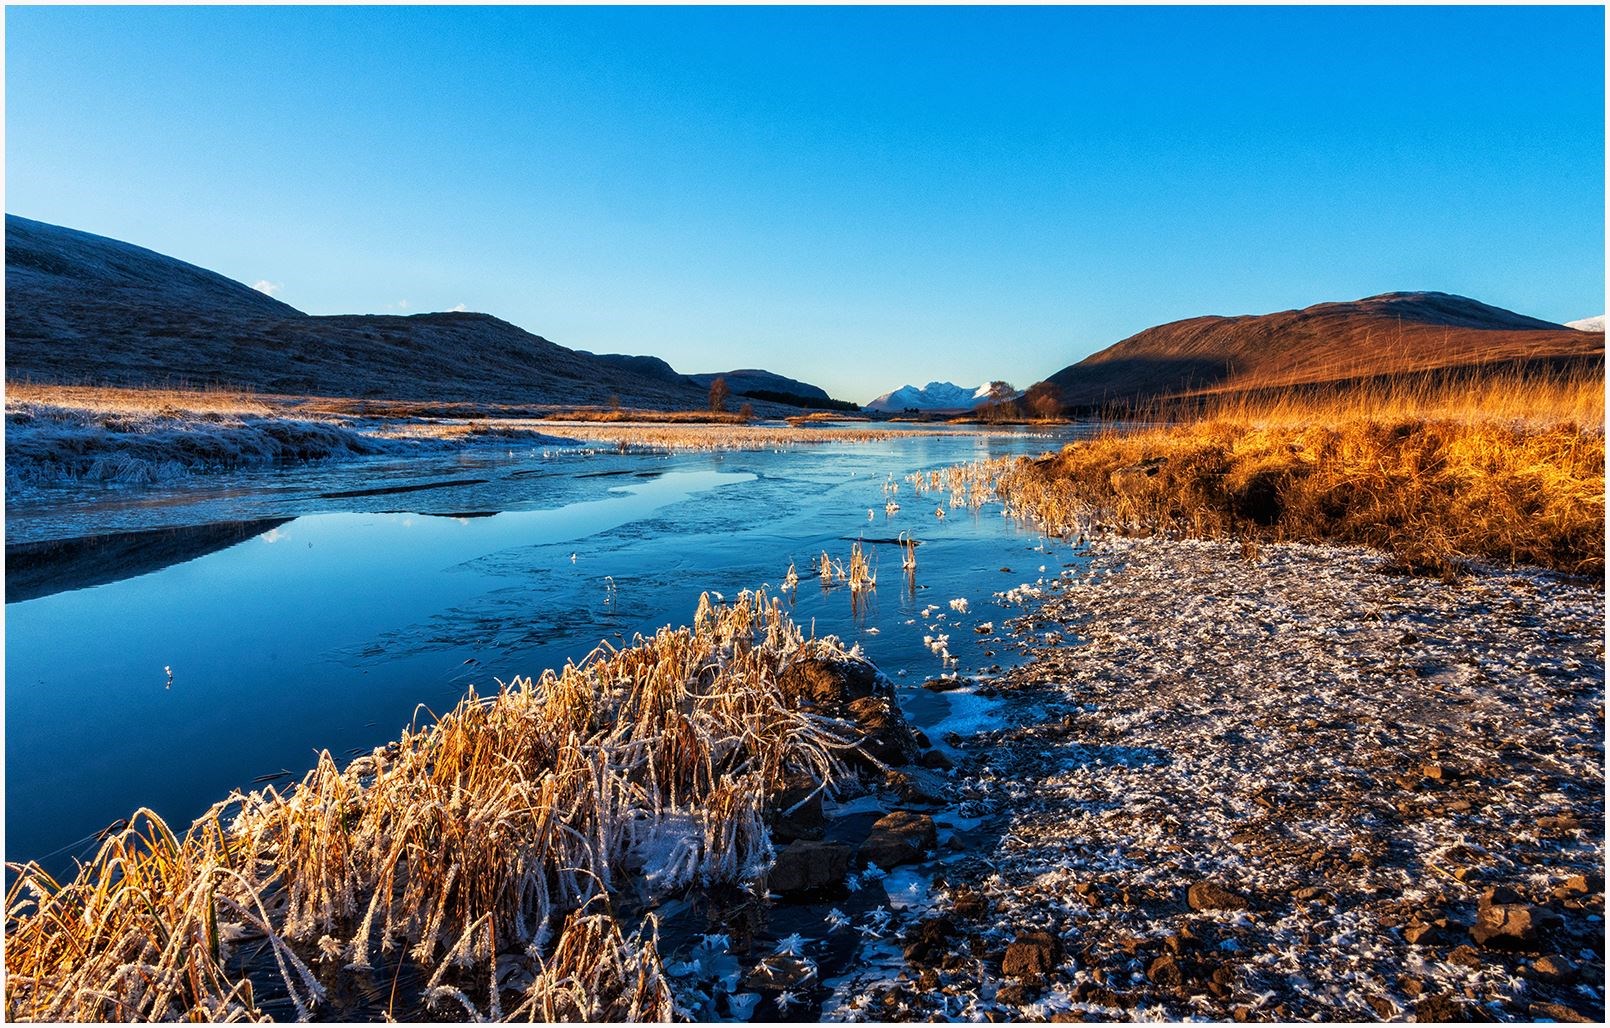 Linda Ross captured the recent cold snap at Loch Droma with this stunning image.